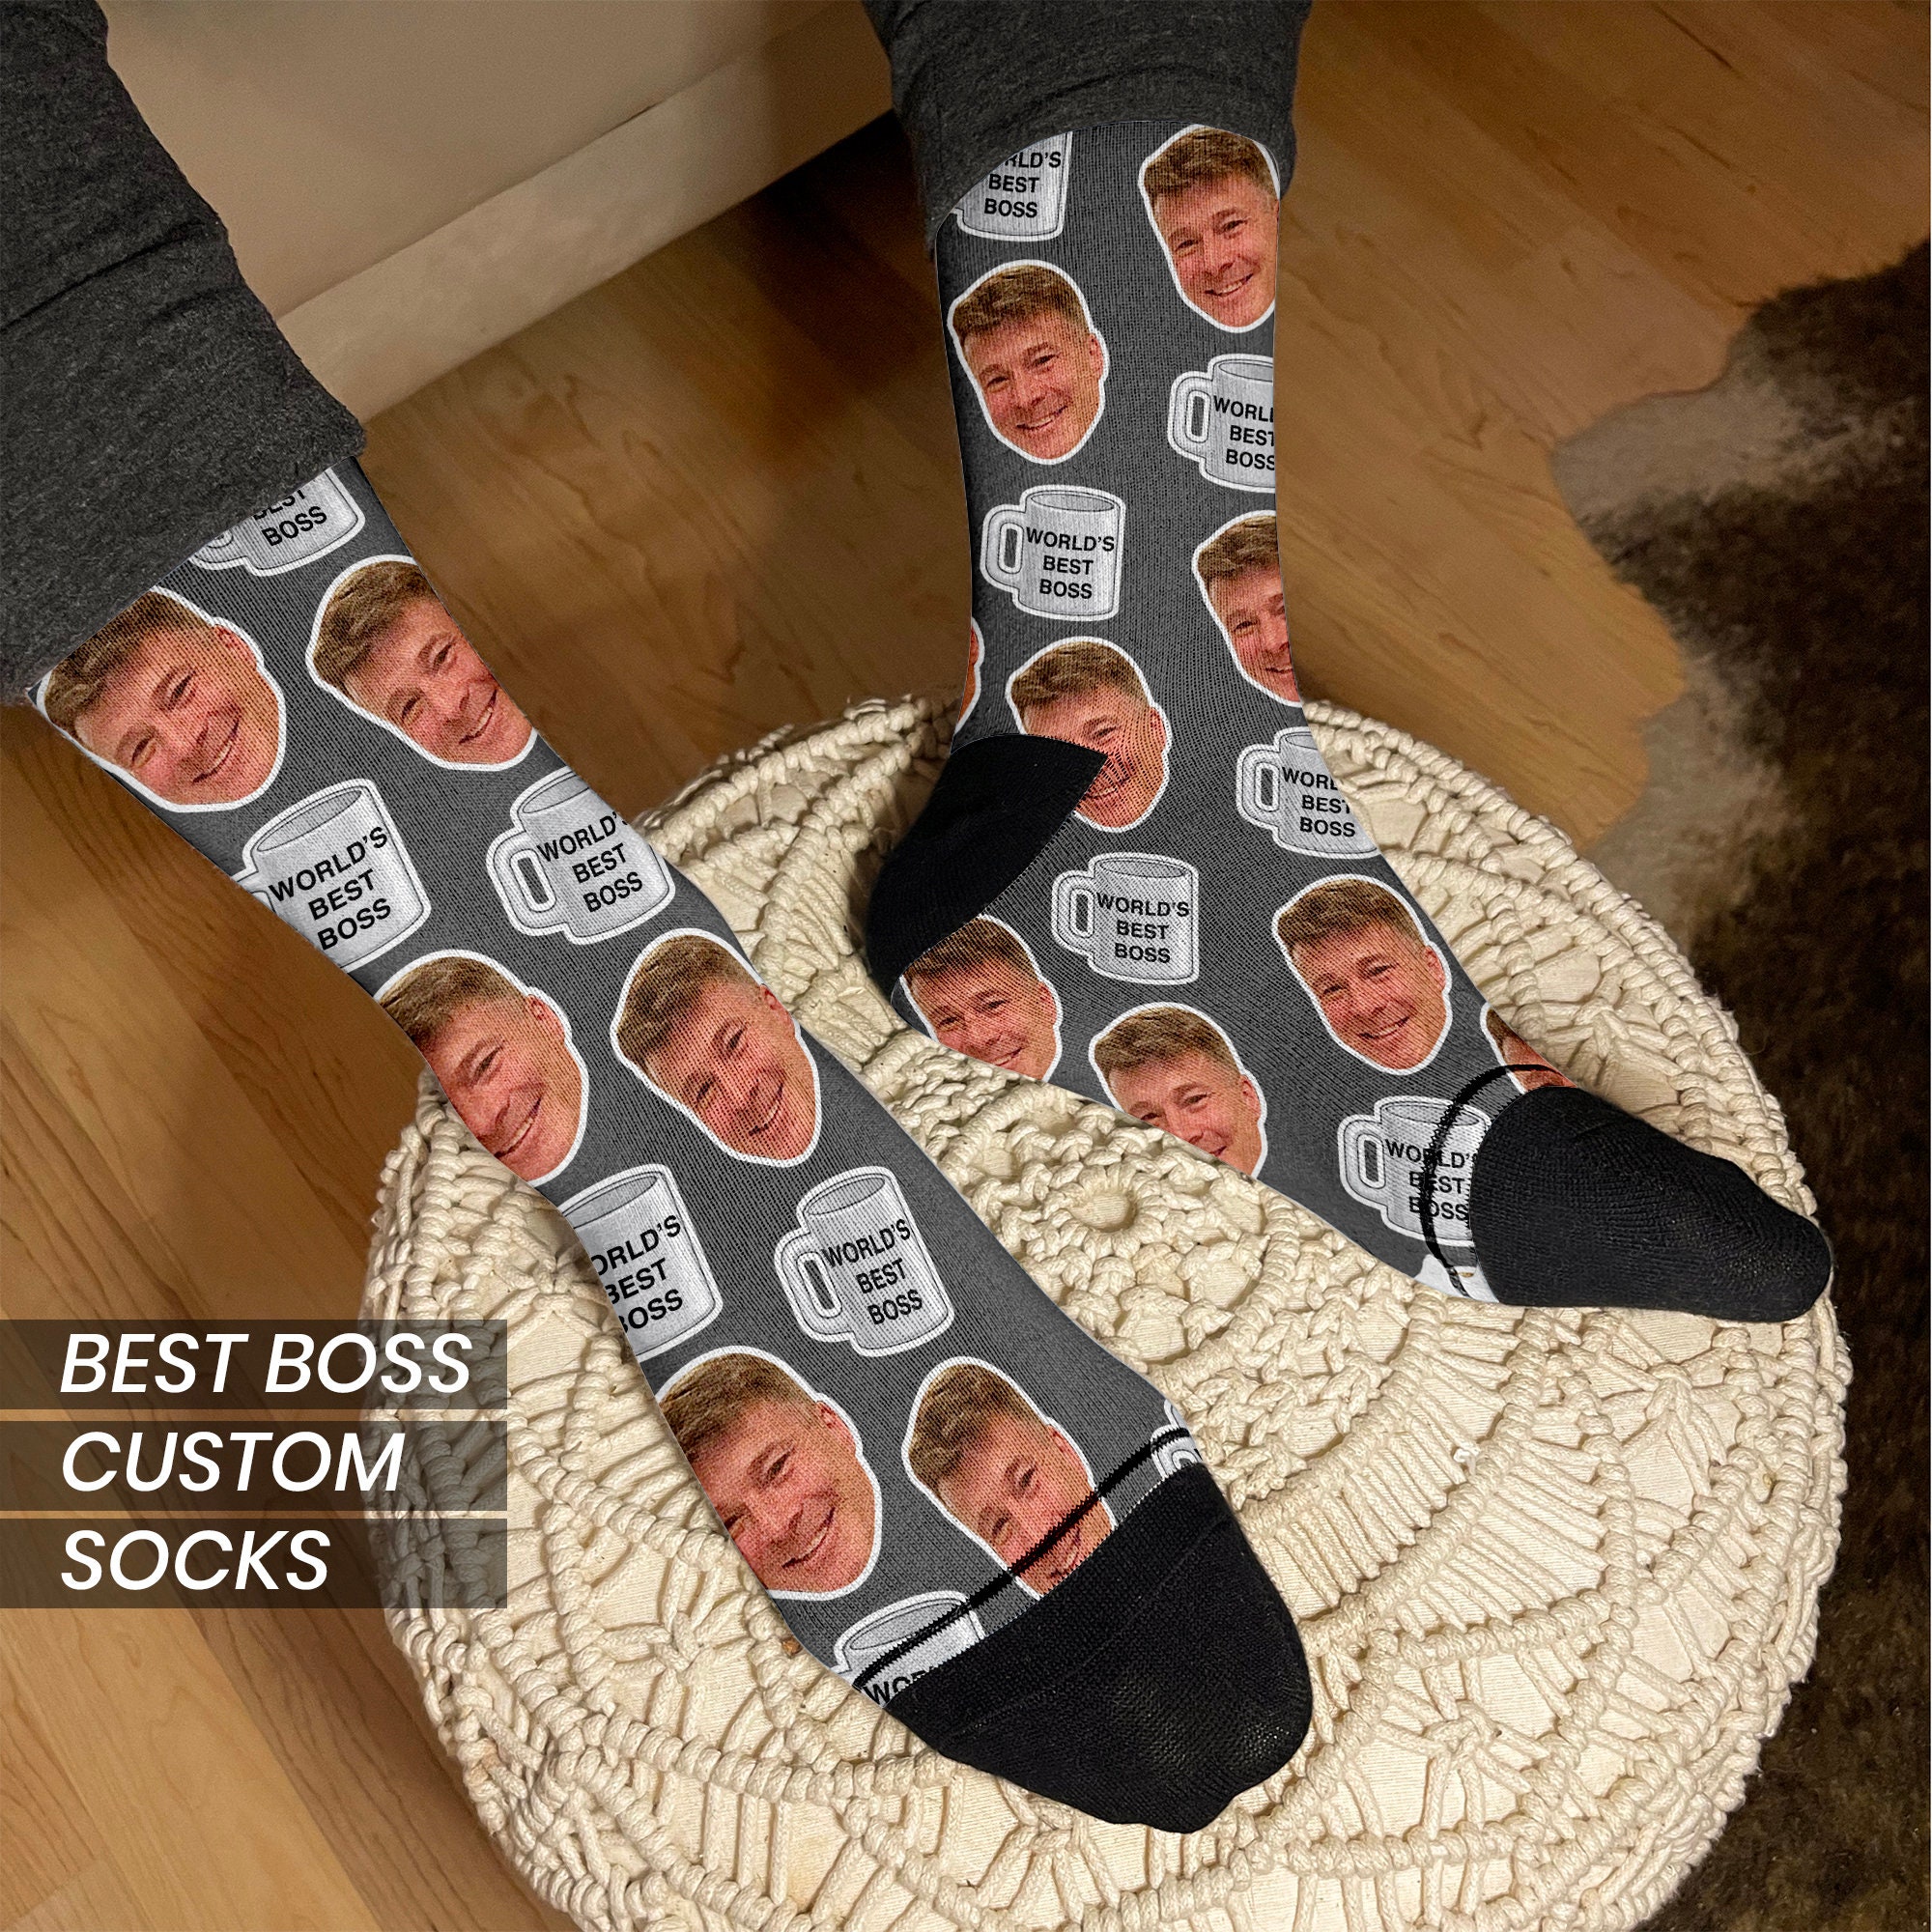 19. Personalized Socks for Co-workers